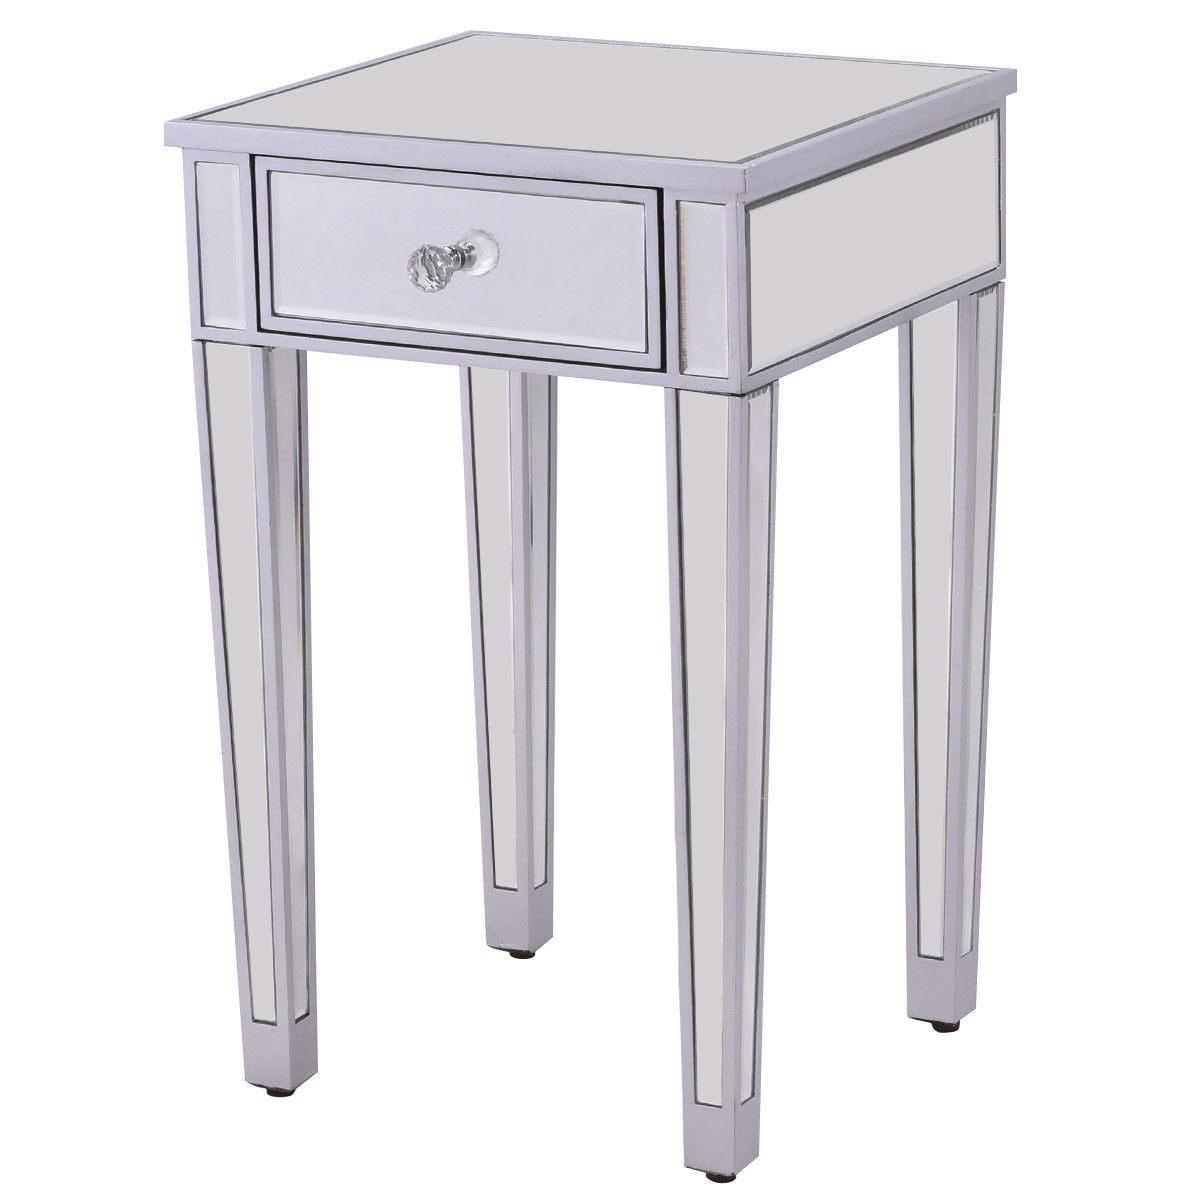 way pcs mirrored accent table nightstand end storage cabinet drawer all wood tables small contemporary lamps cream linen tablecloth outside wall clocks pretty lamp fancy